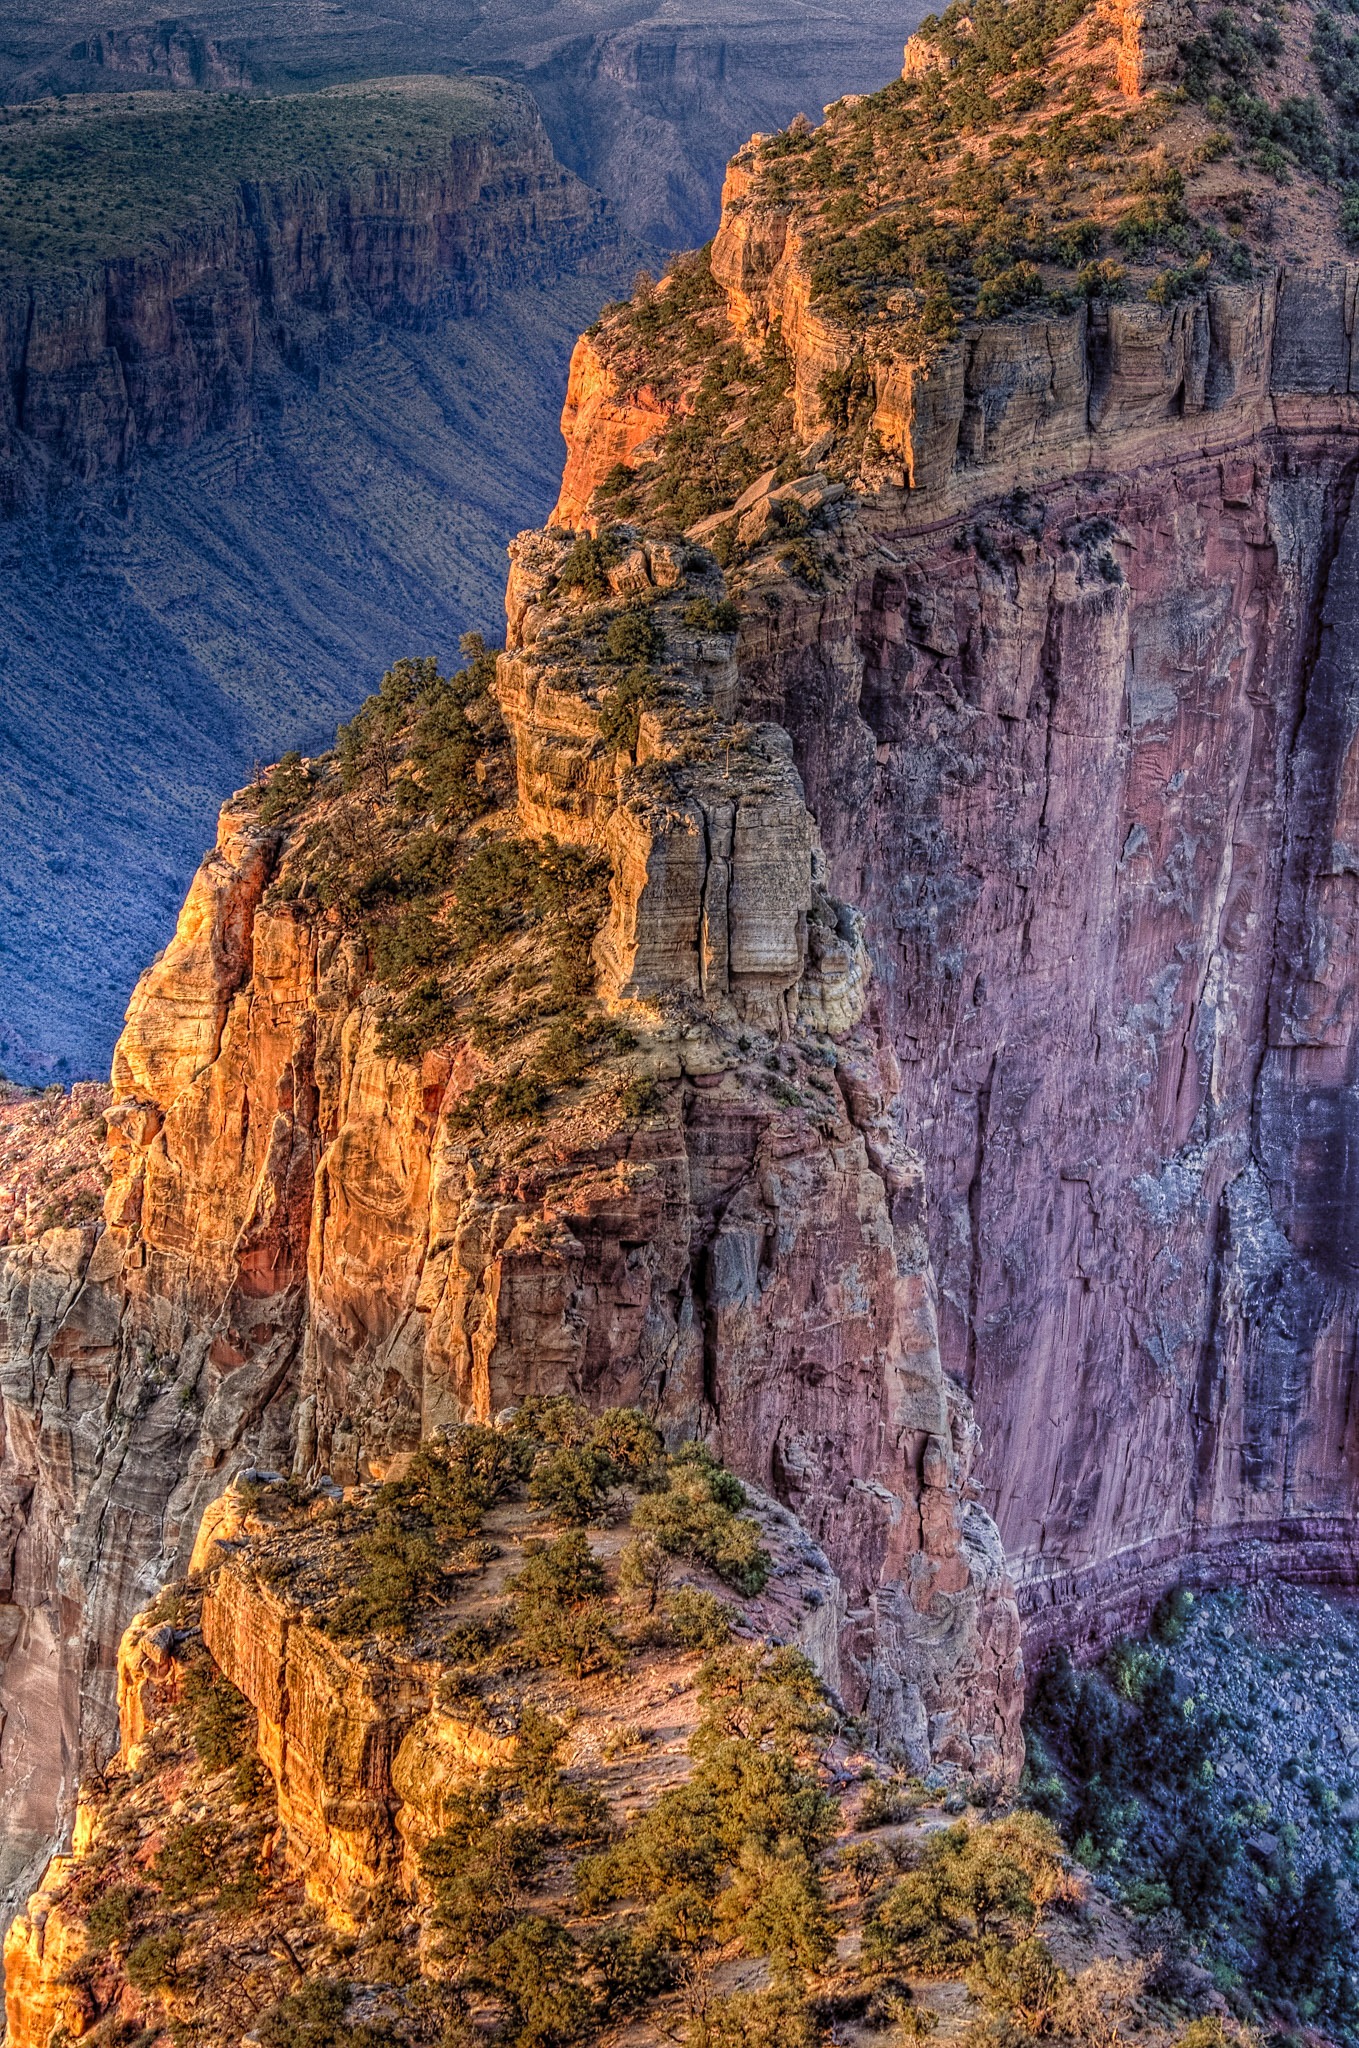 Edge of Wotans Throne at dawn on the North Rim of the Grand Canyon. - Grand Canyon North Rim